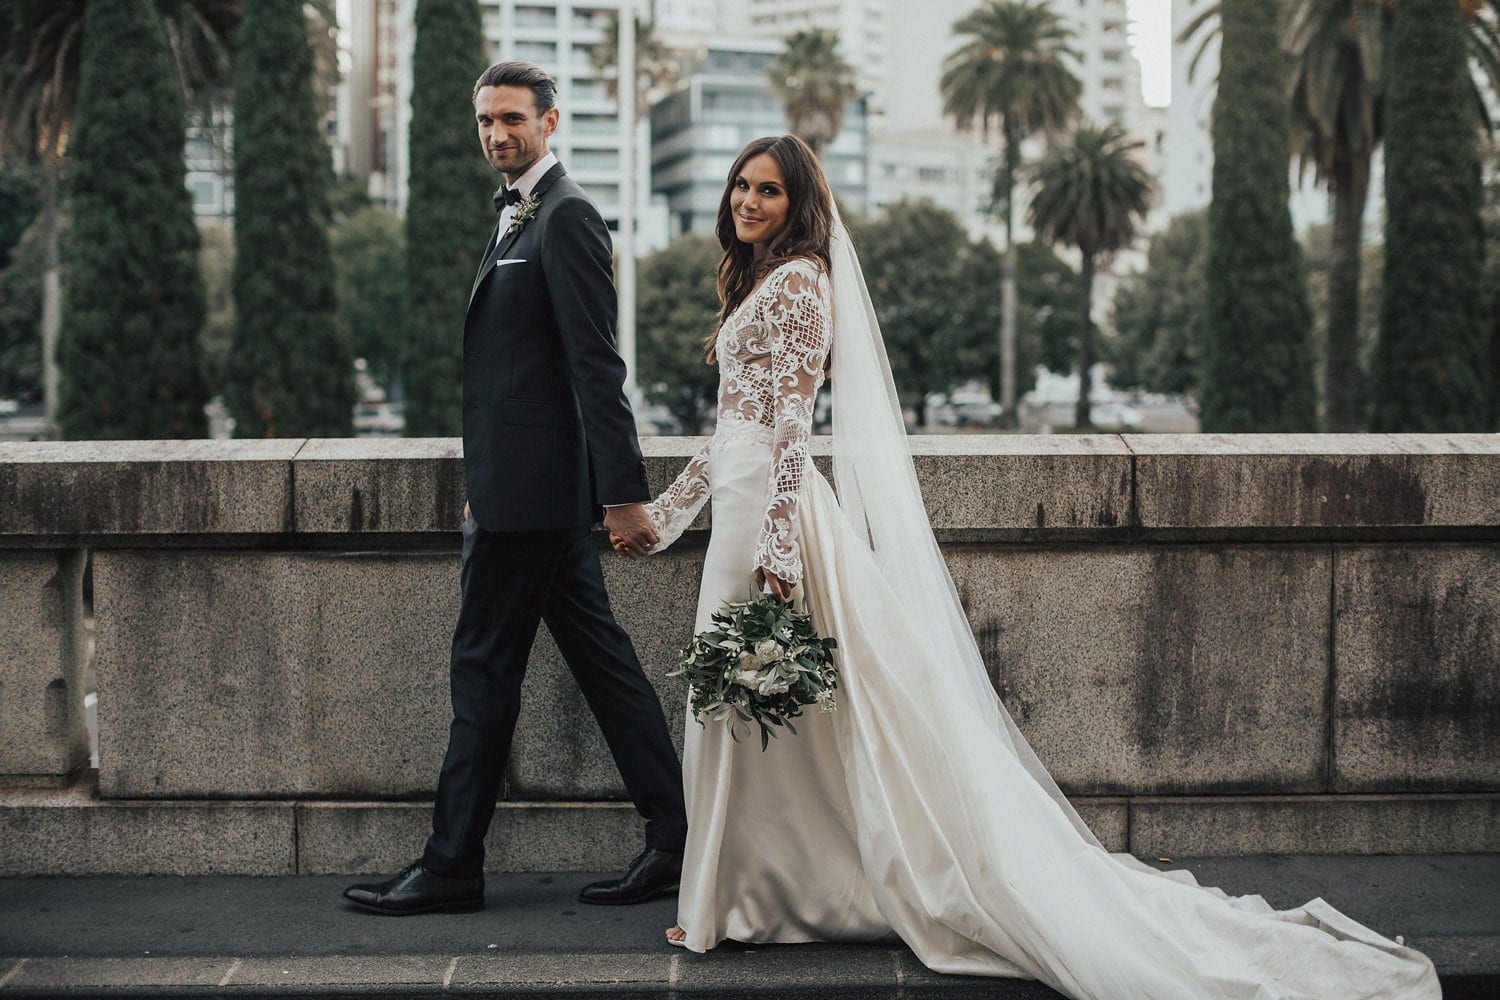 Real Weddings | Vinka Design | Real Brides Wearing Vinka Gowns | Hannah and Campbell - walking along bridge dress in light showing lace detail, train and veil